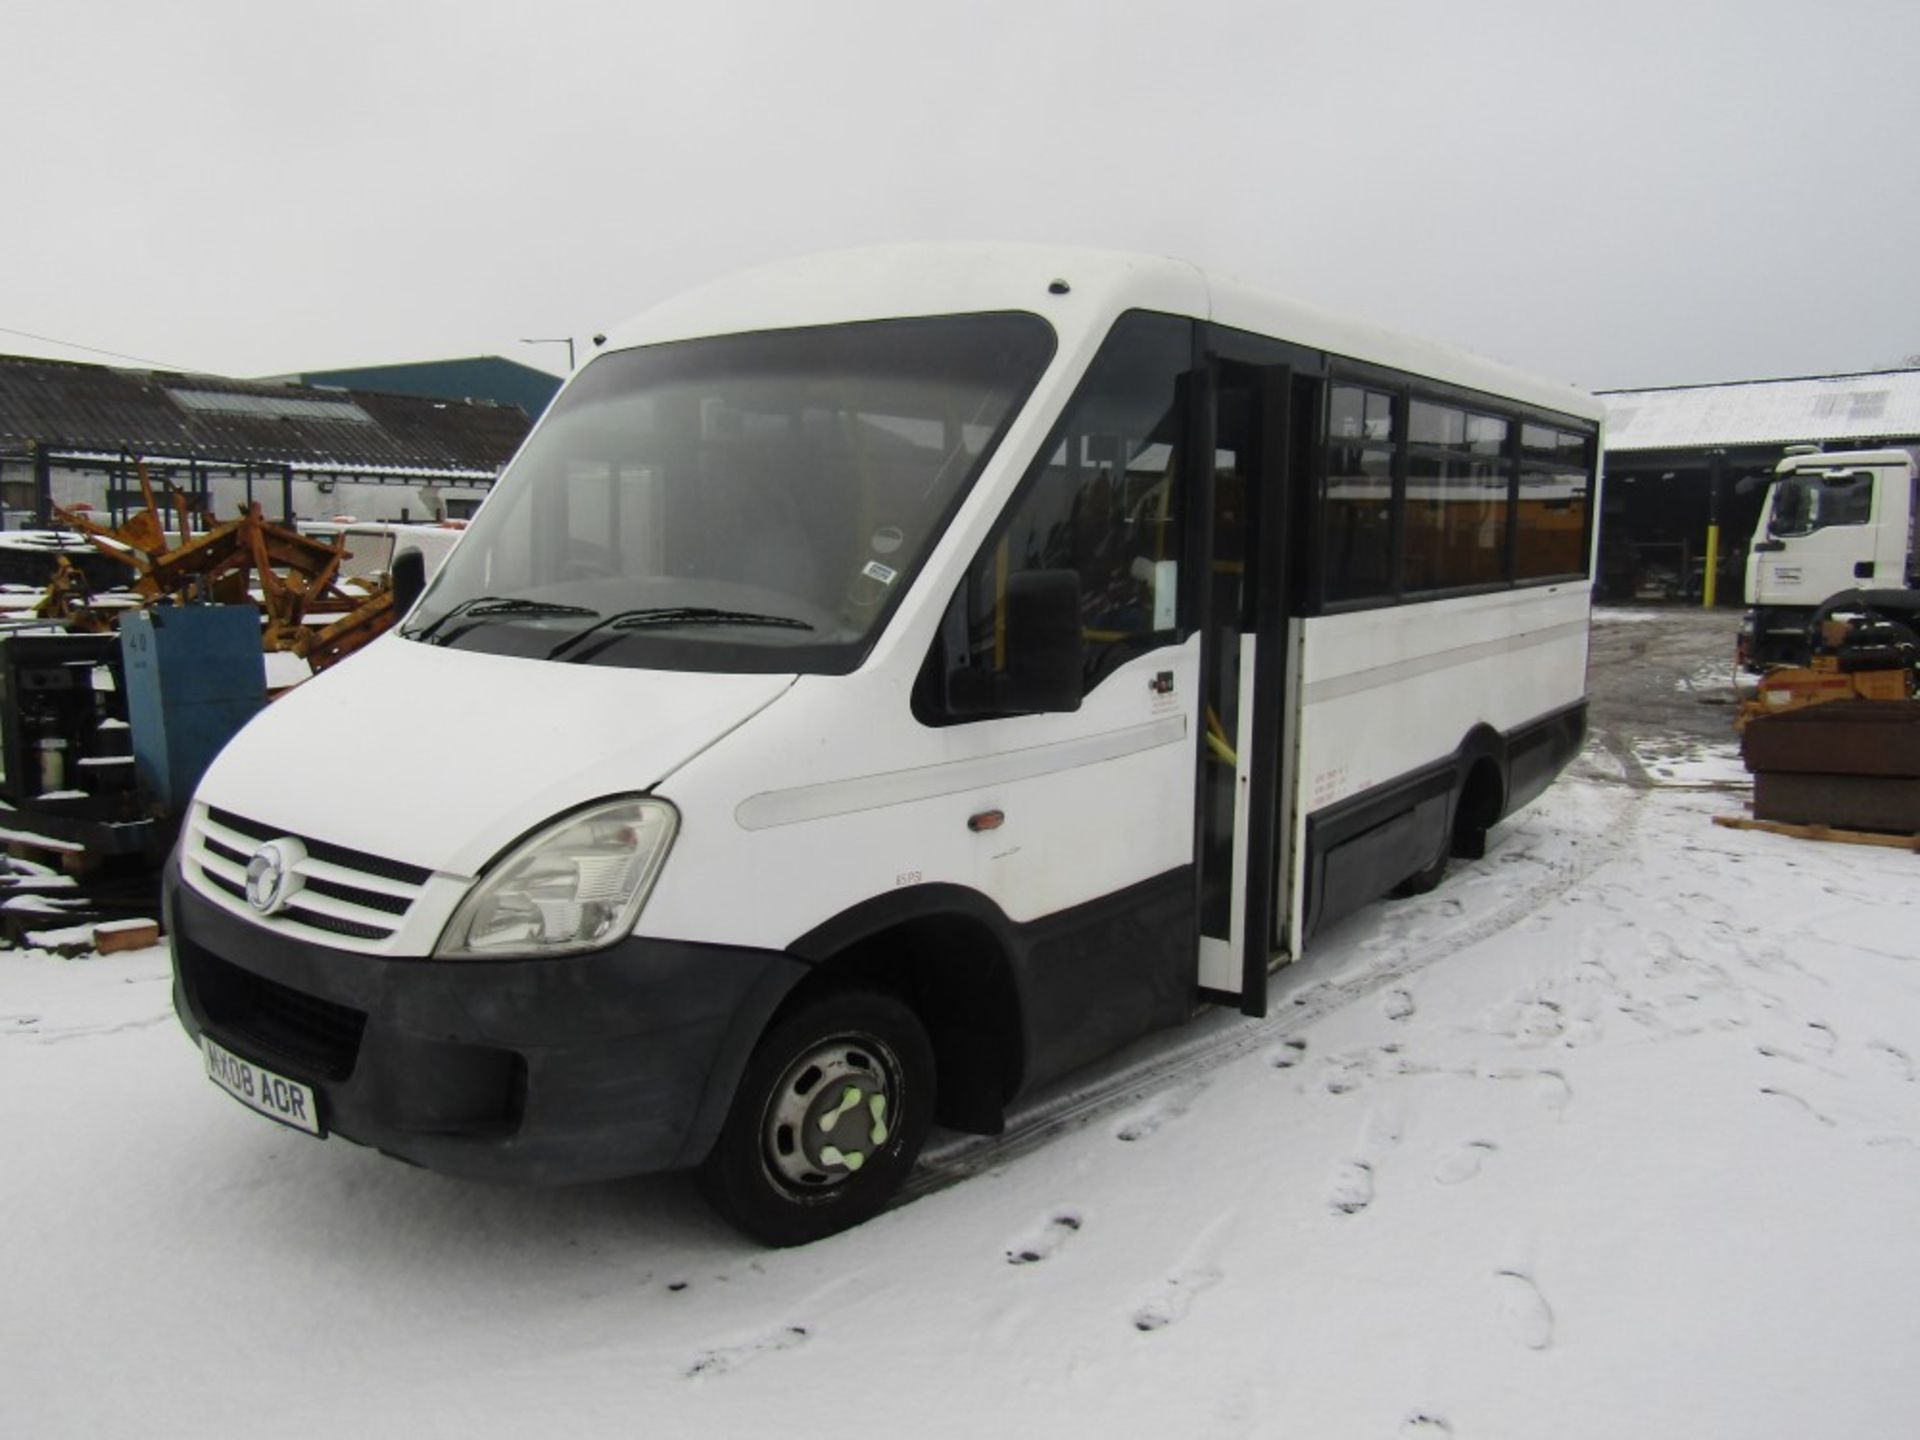 08 reg IVECO IRIS MINIBUS (EX COUNCIL) 1ST REG 03/08, TEST 03/22, 153233KM, V5 HERE, 1 OWNER FROM - Image 2 of 7